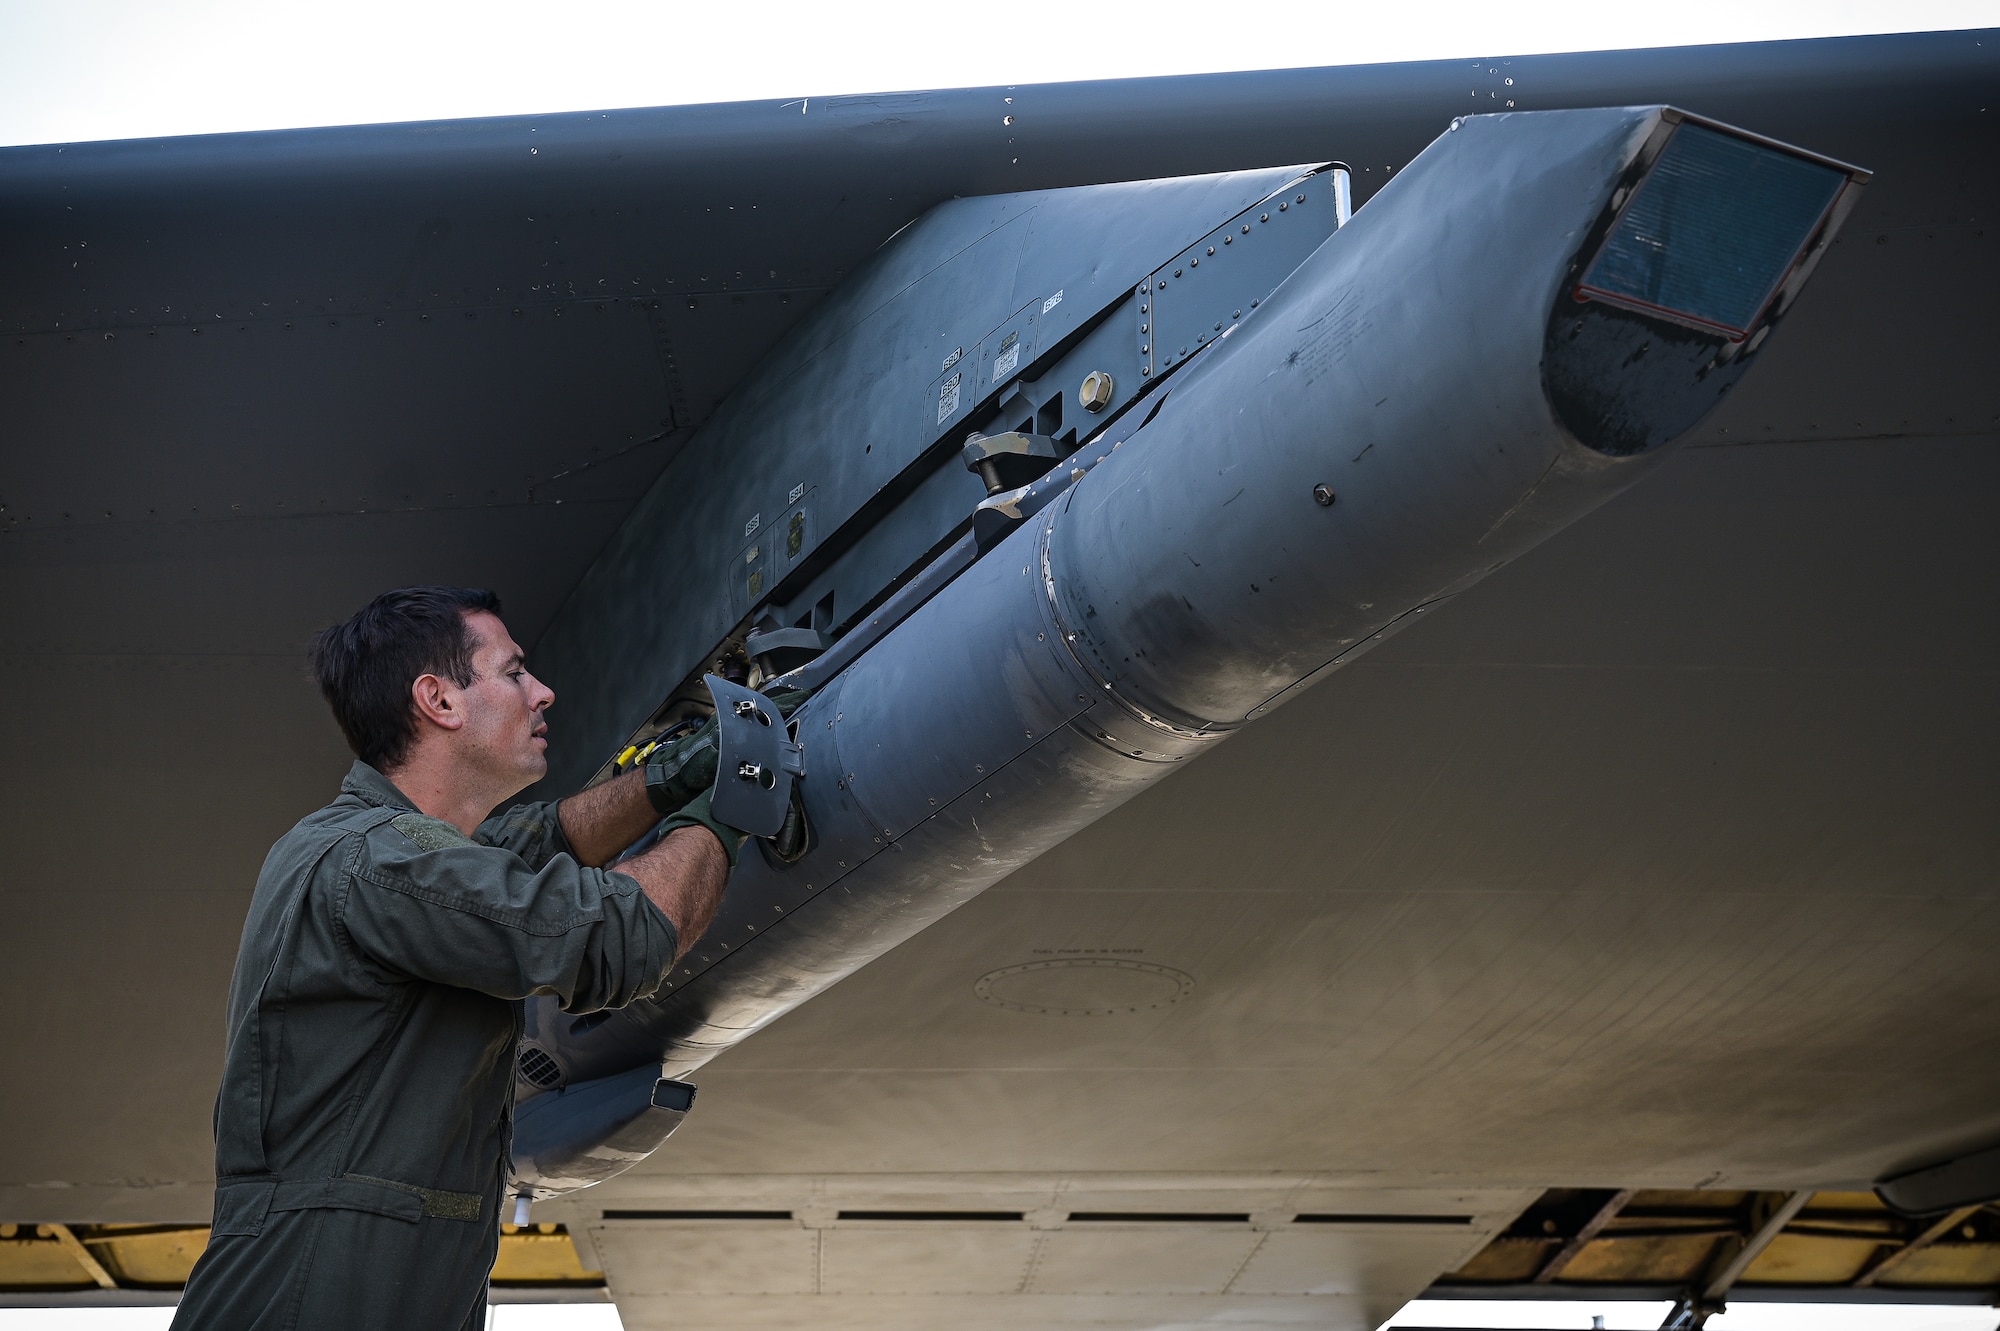 Capt. Jonathan Acker, 20th Bomb Squadron navigator, inspects the sniper pod on a B-52H Stratofortress in support of RIMPAC 2022 at Barksdale Air Force Base, Aug. 1, 2022. Twenty-six nations, 38 ships, three submarines, more than 170 aircraft and 25,000 personnel are participating in RIMPAC from June 29 to Aug. 4 in and around the Hawaiian Islands and Southern California. The world’s largest international maritime exercise, RIMPAC provides a unique training opportunity while fostering and sustaining cooperative relationships among participants critical to ensuring the safety of sea lanes and security on the world’s oceans. RIMPAC 2022 is the 28th exercise in the series that began in 1971. (U.S. Air Force photo by Senior Airman Jonathan E. Ramos)